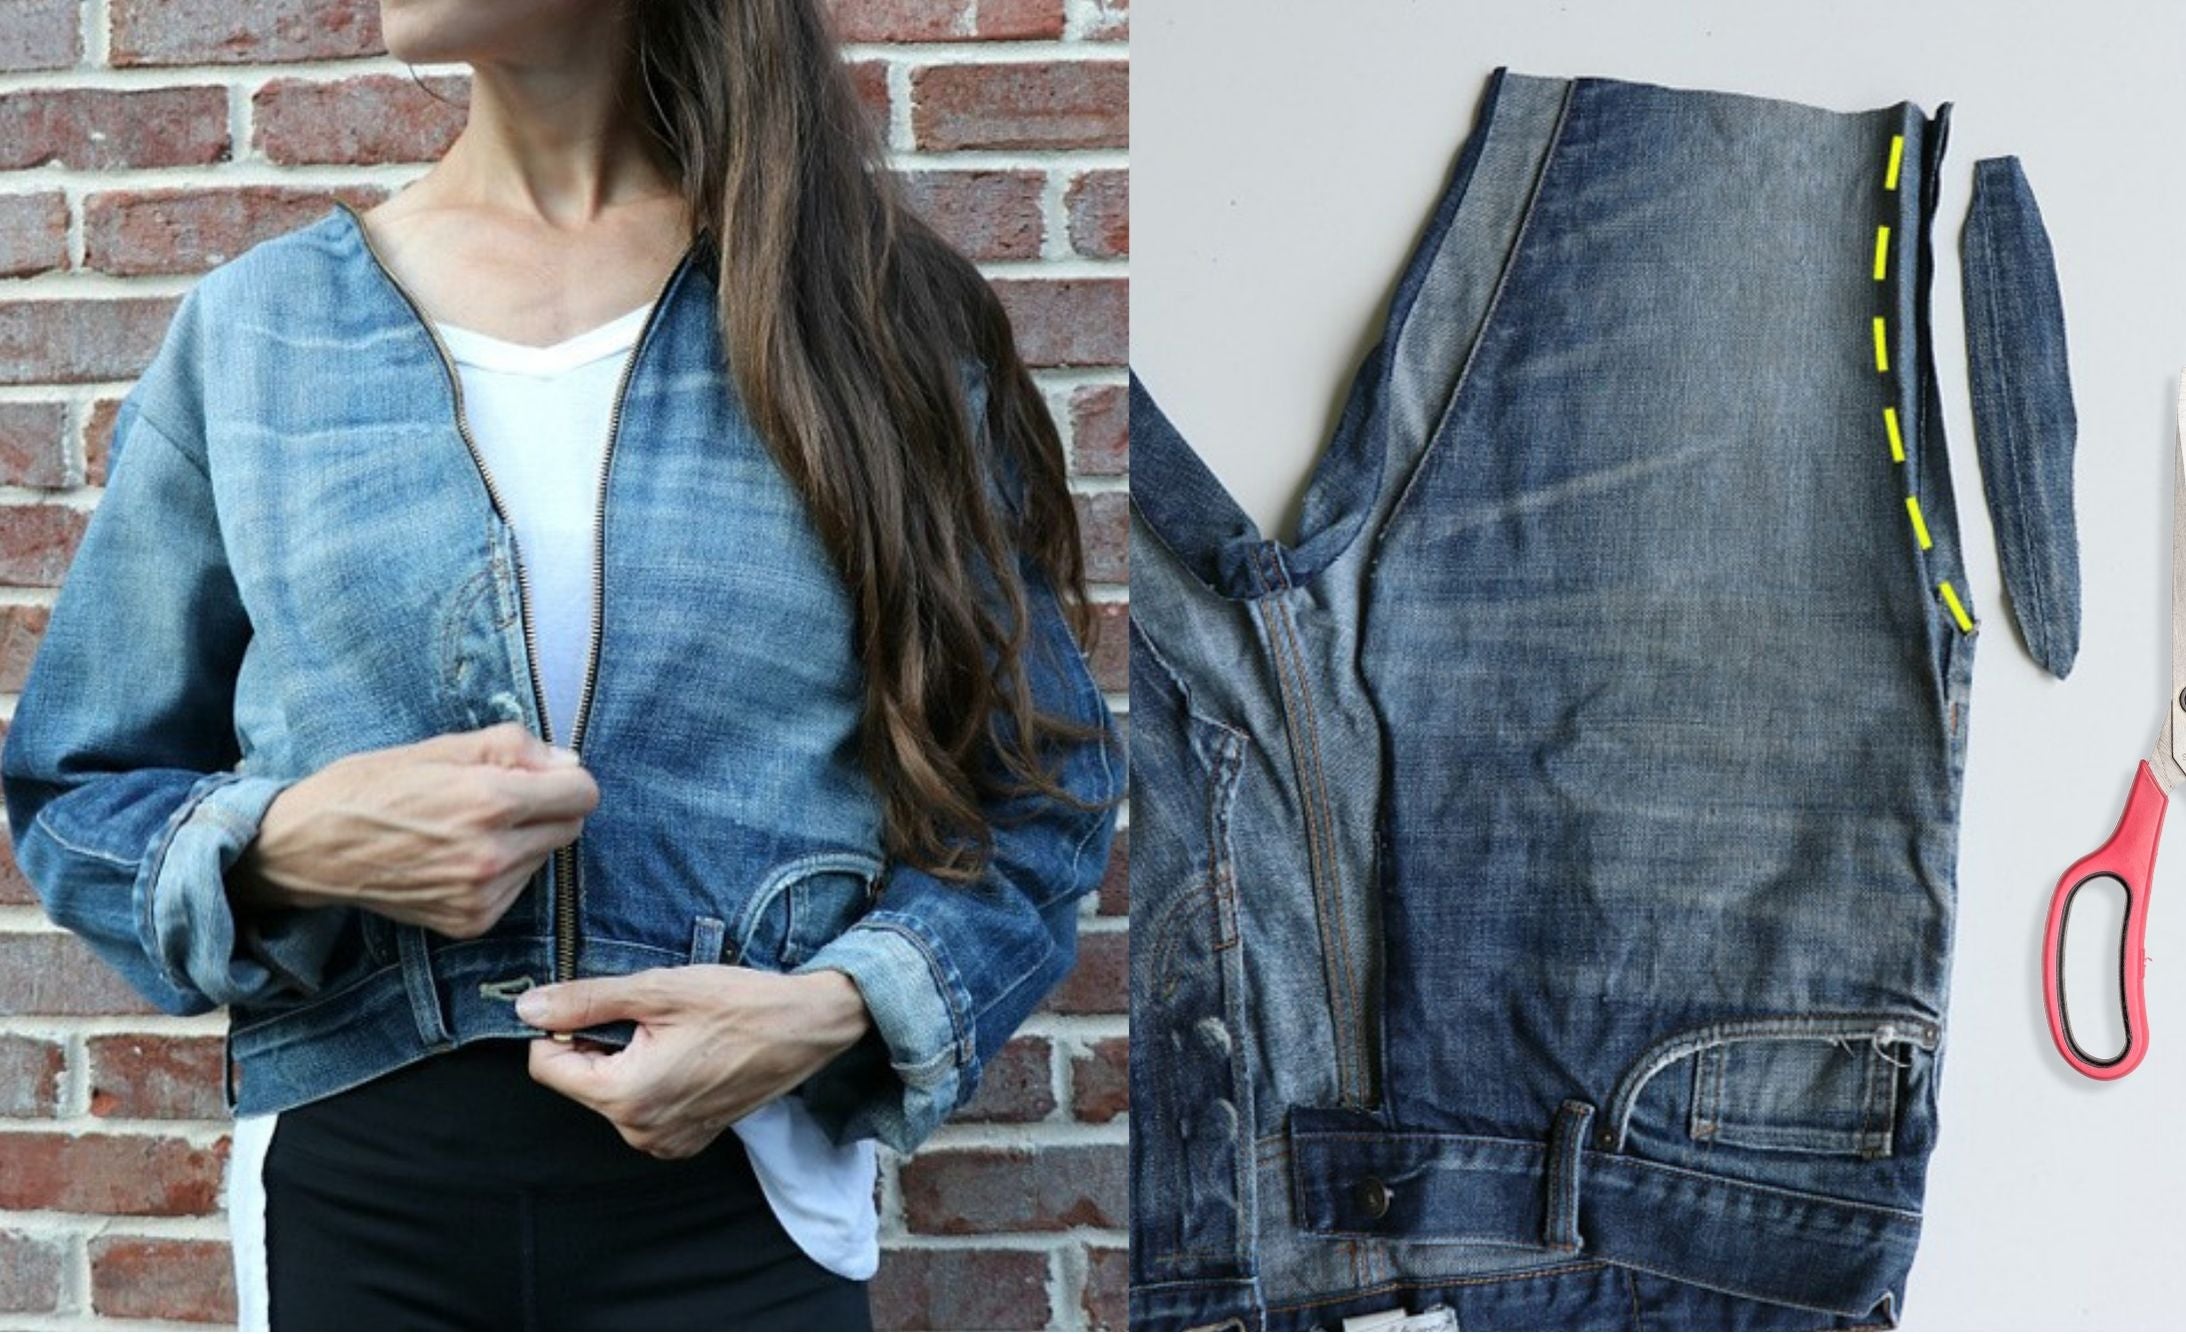 Denim Jean Jackets For The Bride, Bridesmaids & Groom | Denim and lace,  Embroidered jean jacket, Jean jacket diy